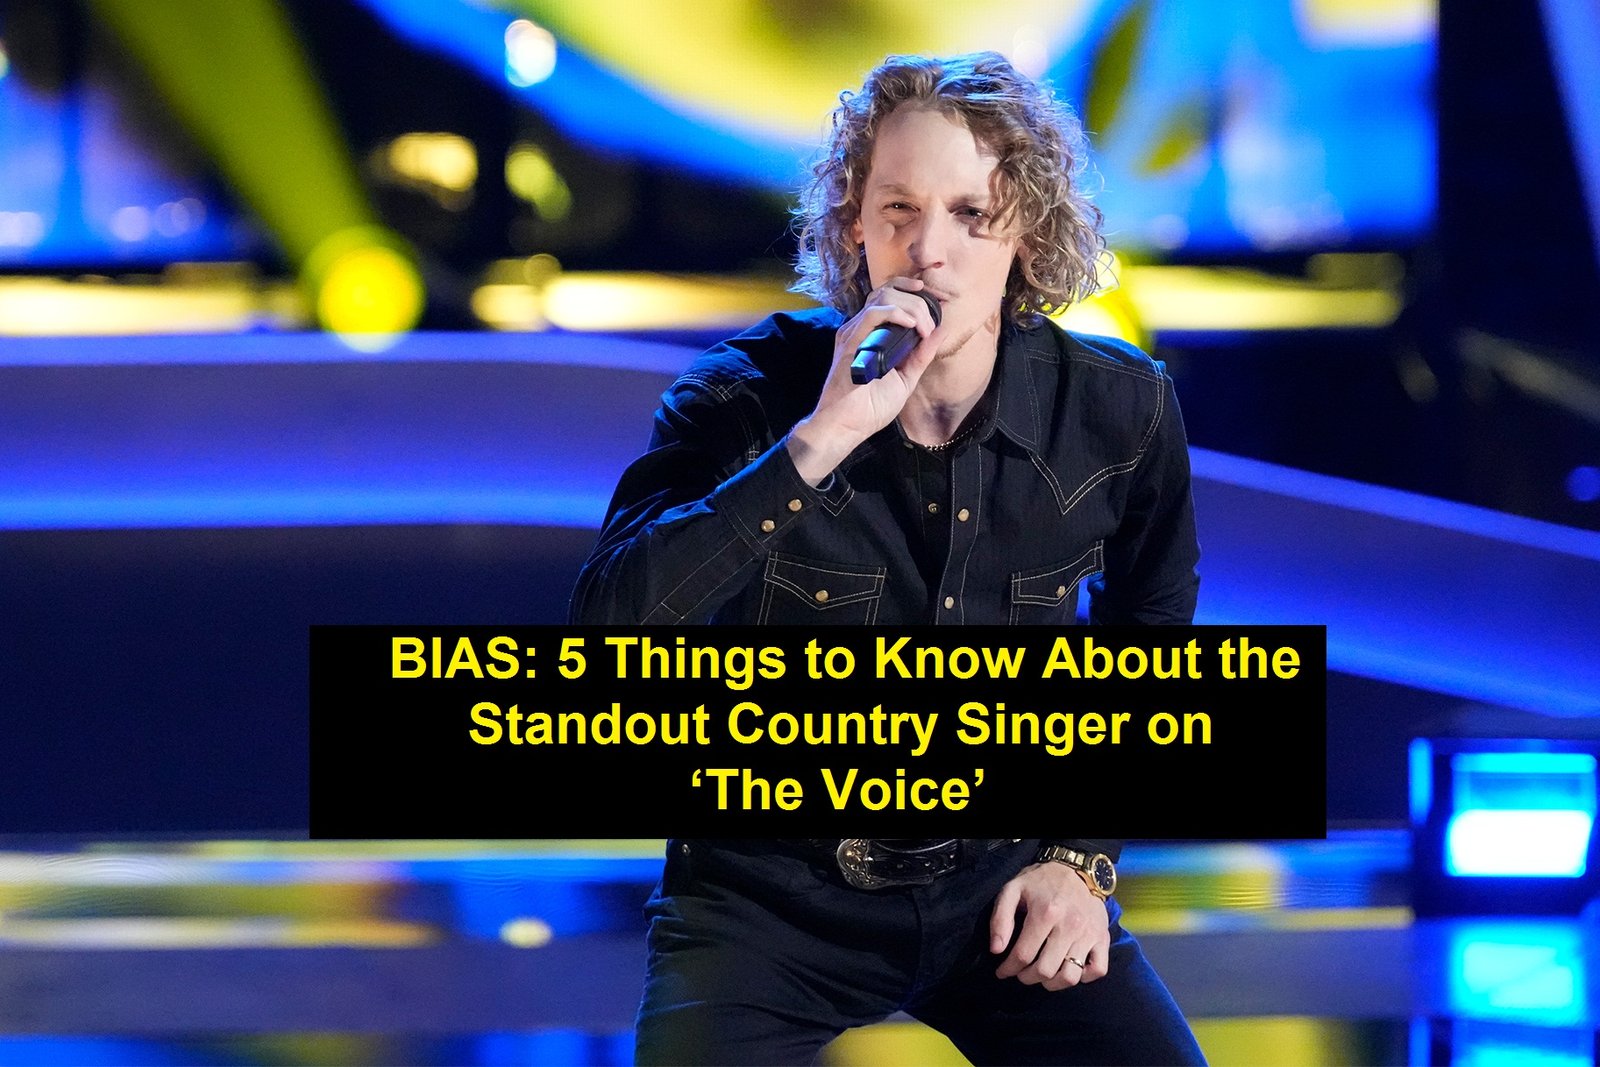 BIAS: 5 Things to Know About the Standout Country Singer on ‘The Voice’